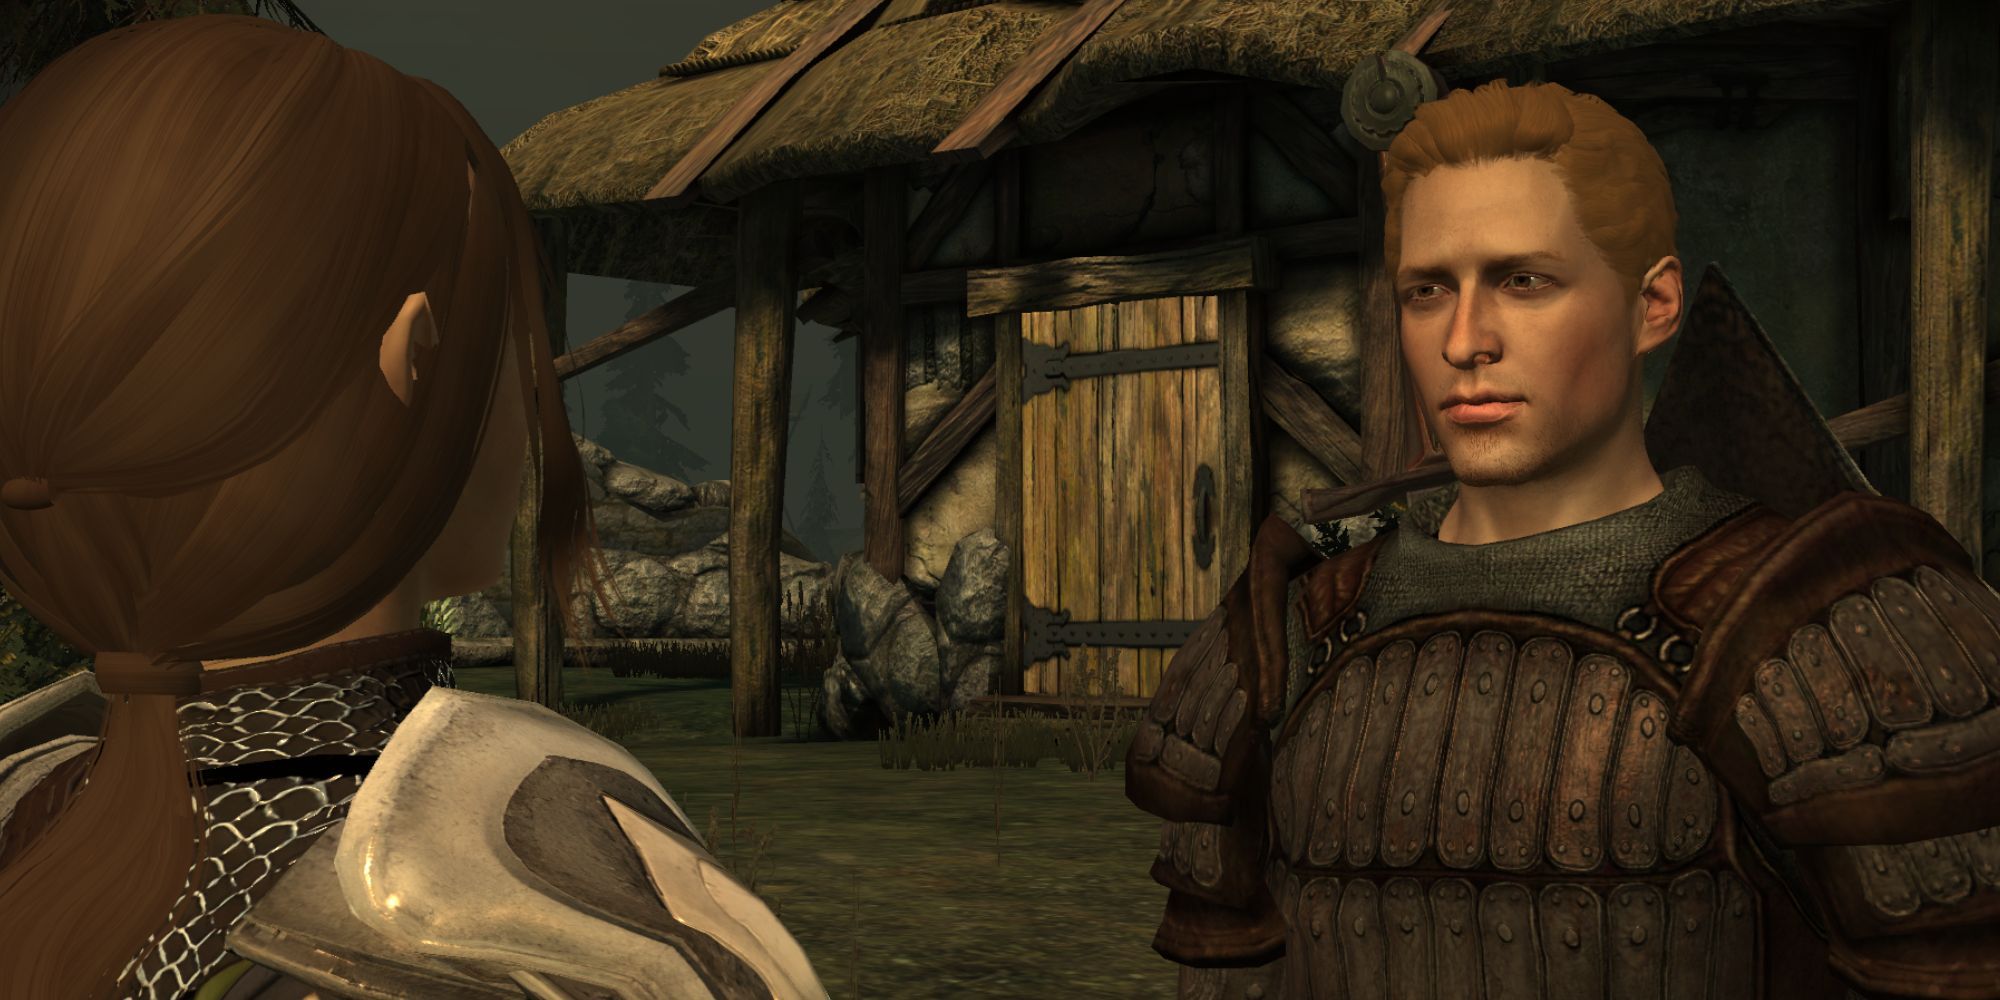 dragon-age-origins-character-face-mod (1)